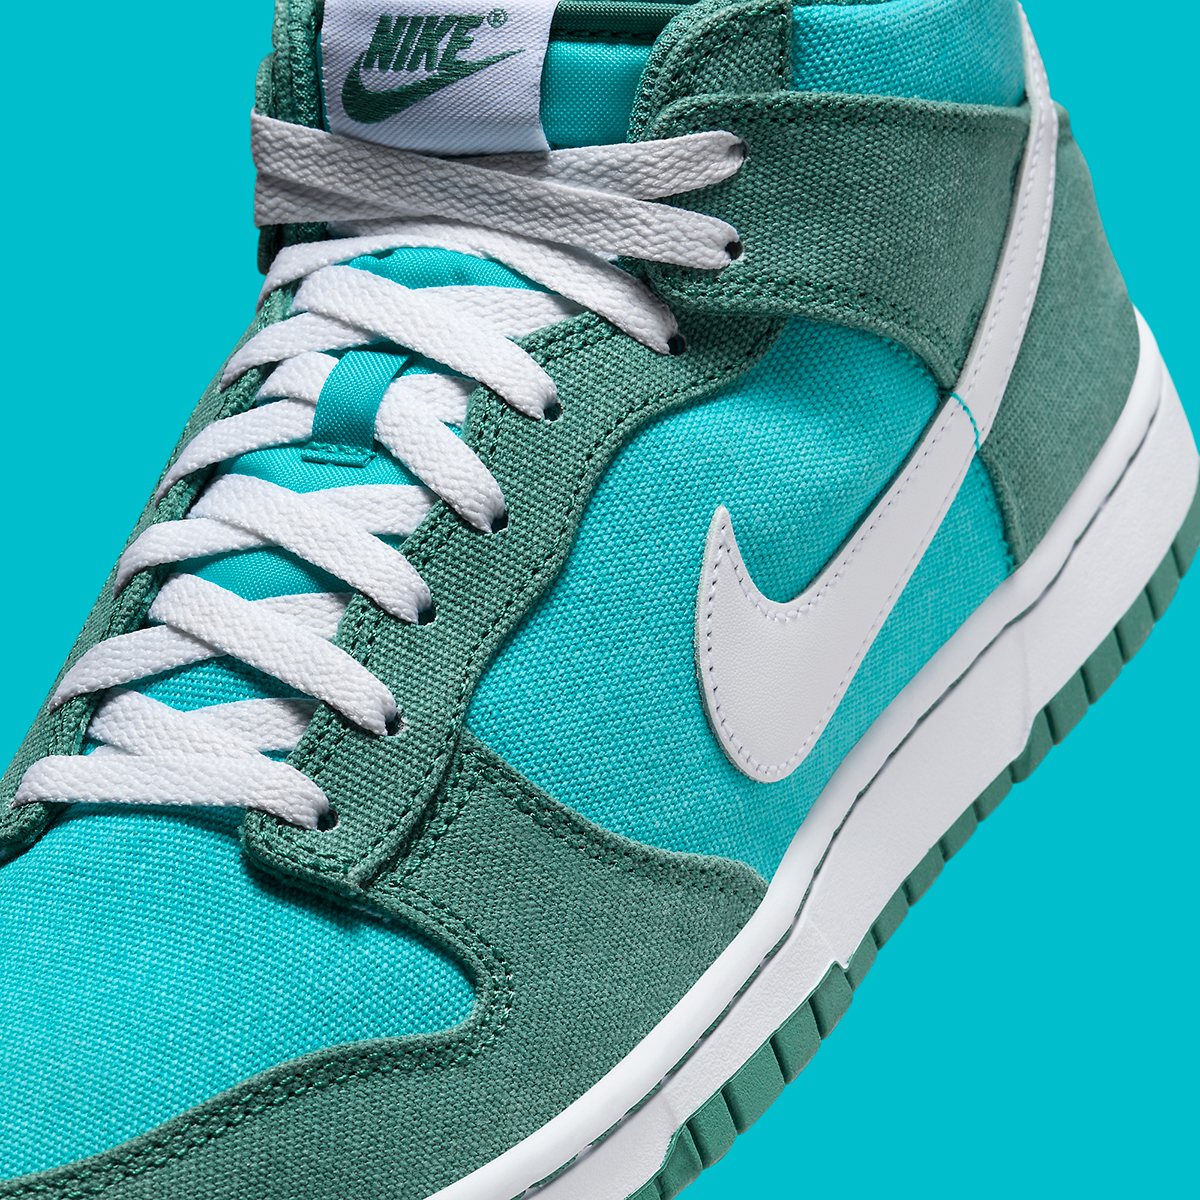 nike Contracts dunk mid canvas dusty cactus light green dv0830 300 4